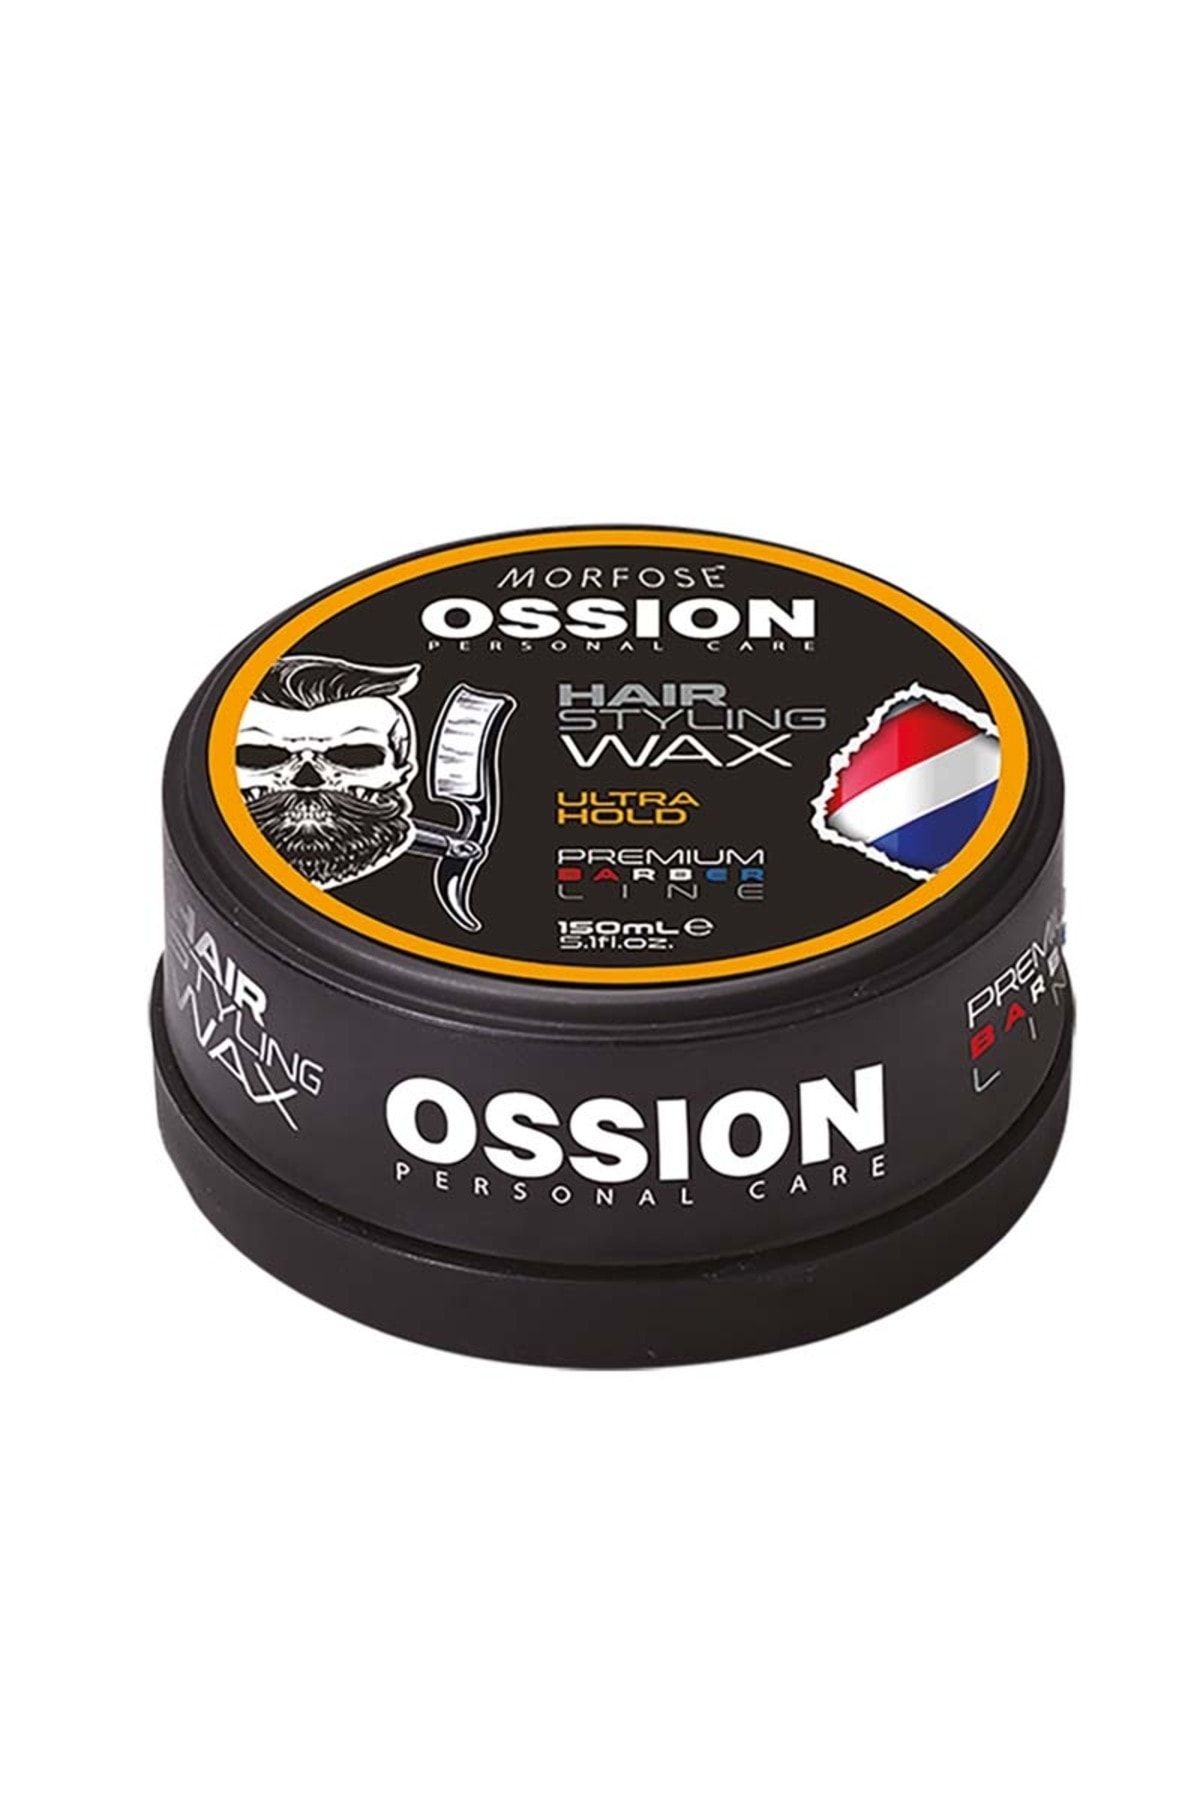 Morfose Ossion Hair Styling Ultra Hold Wax 150 ml